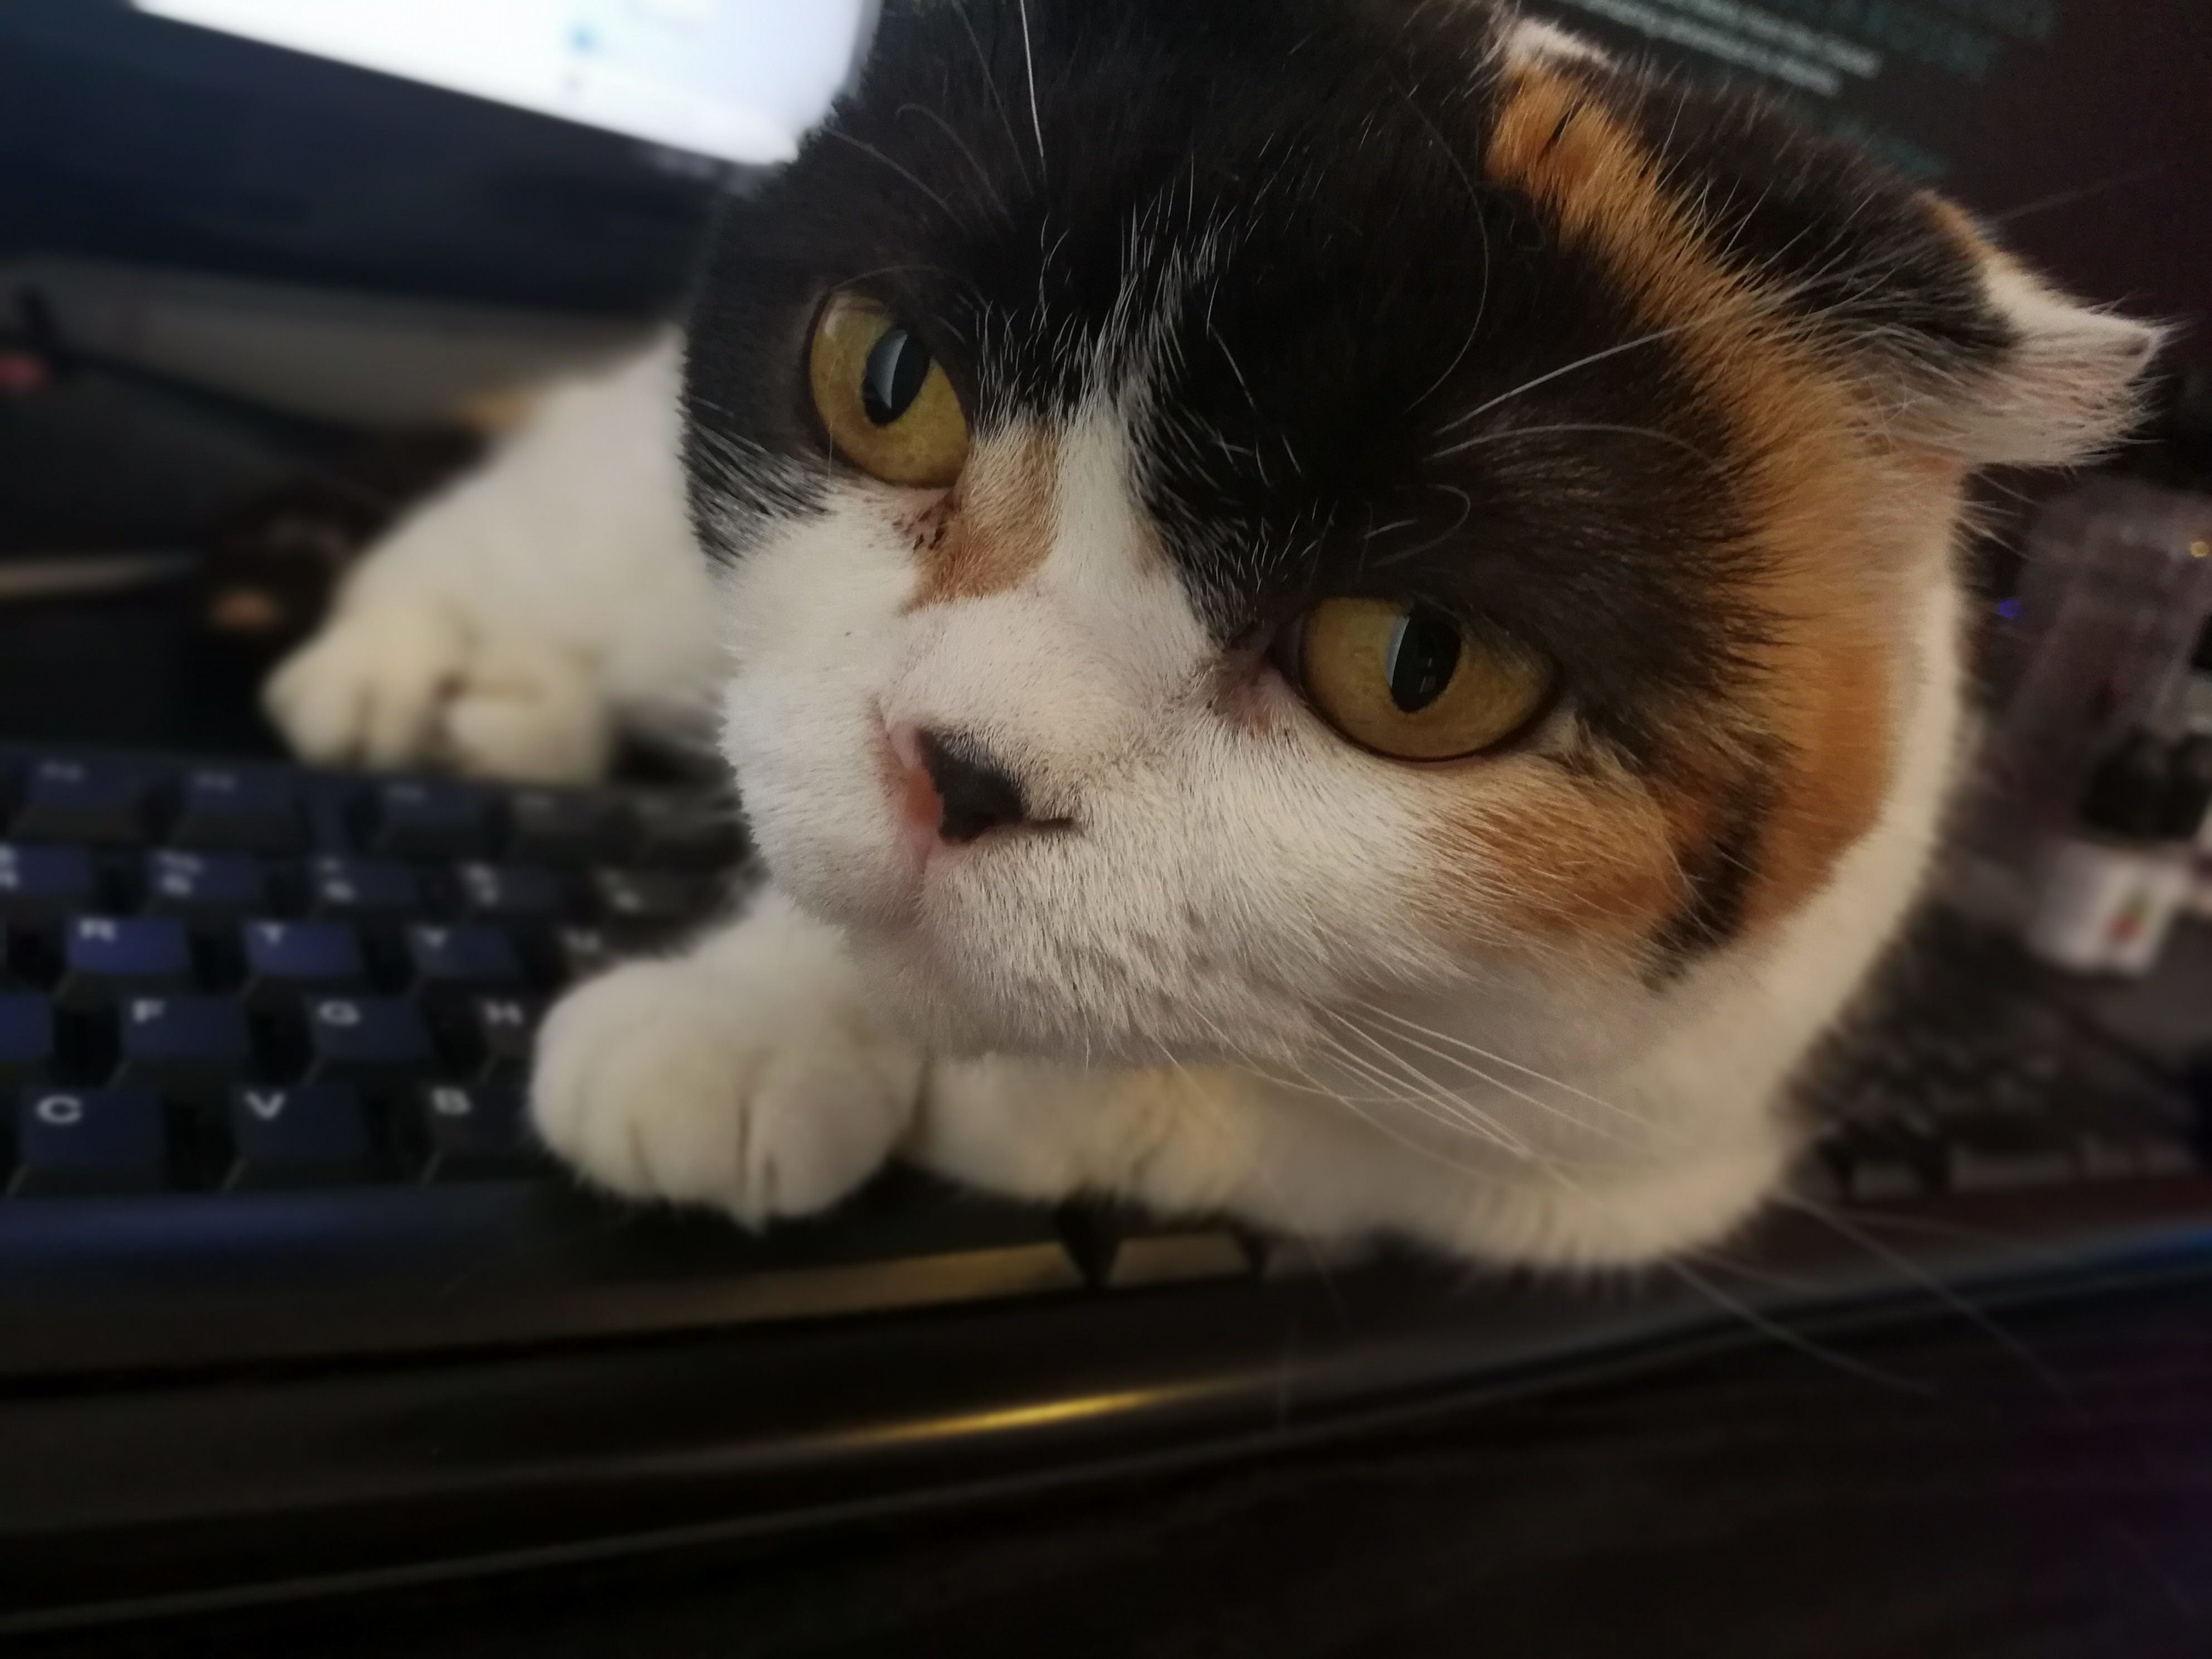 You werent planning on using the keyboard right